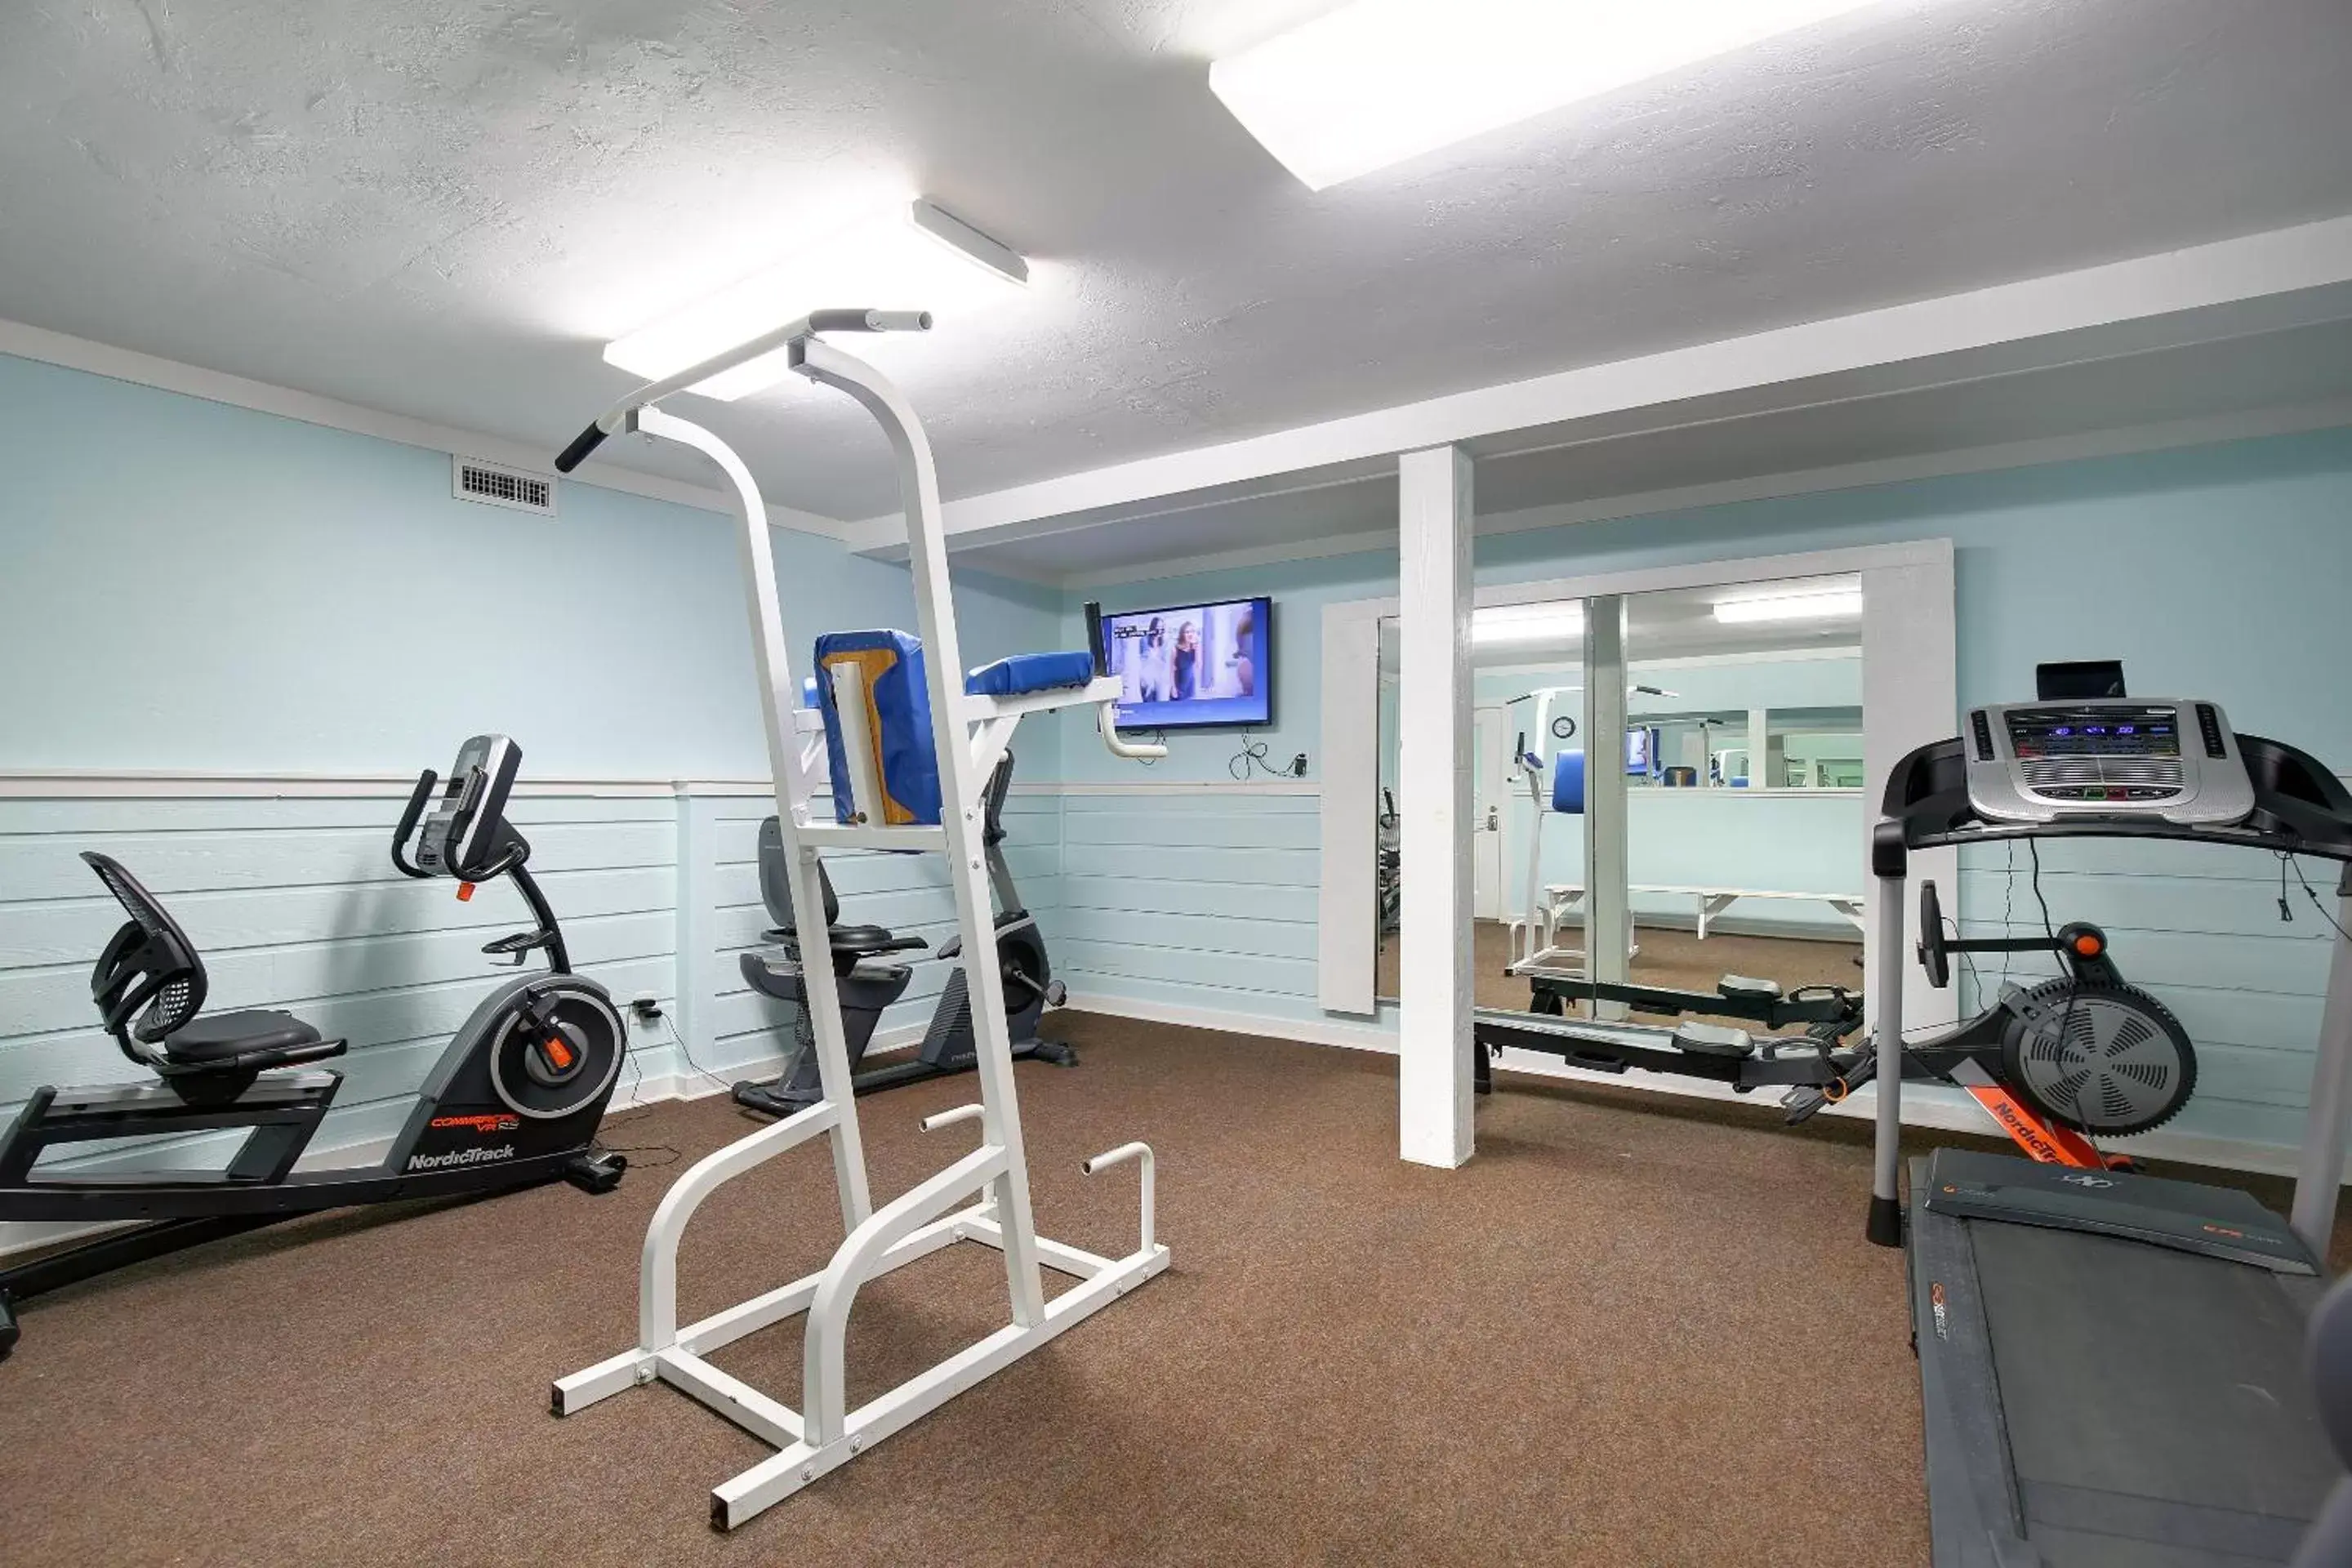 Fitness centre/facilities, Fitness Center/Facilities in Barrier Island Station, a VRI resort